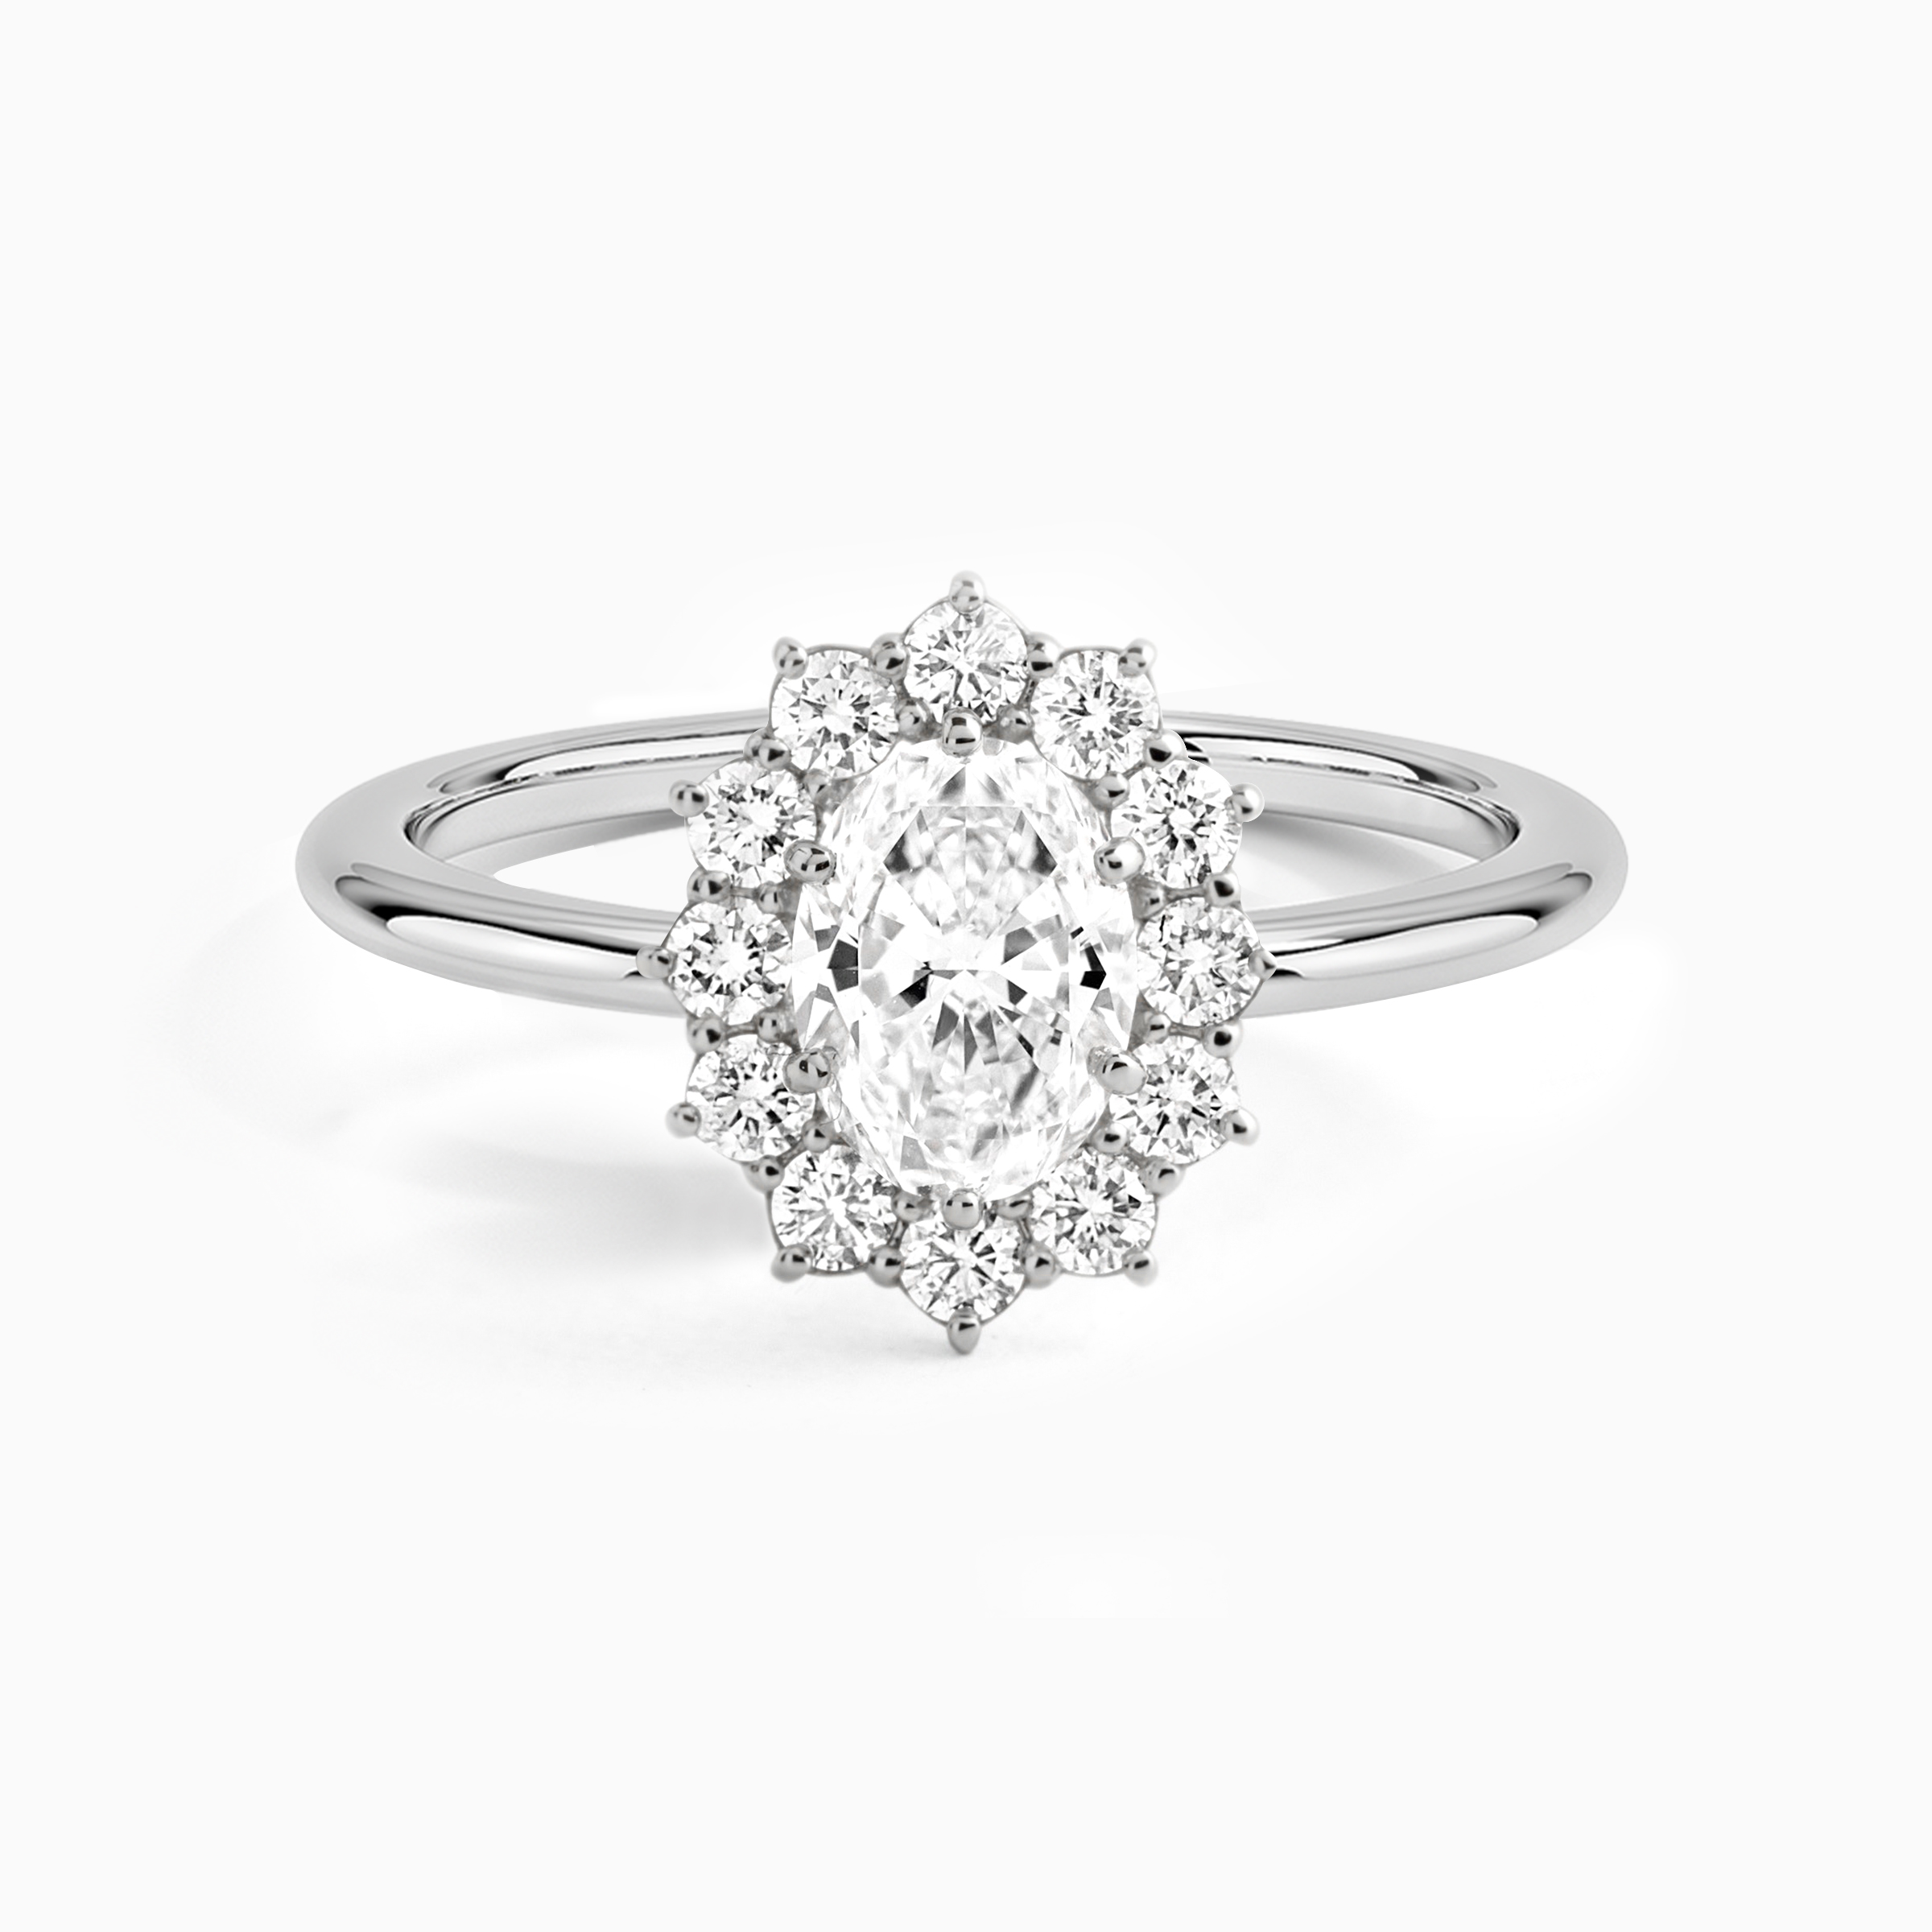 Darry Ring oval halo ring